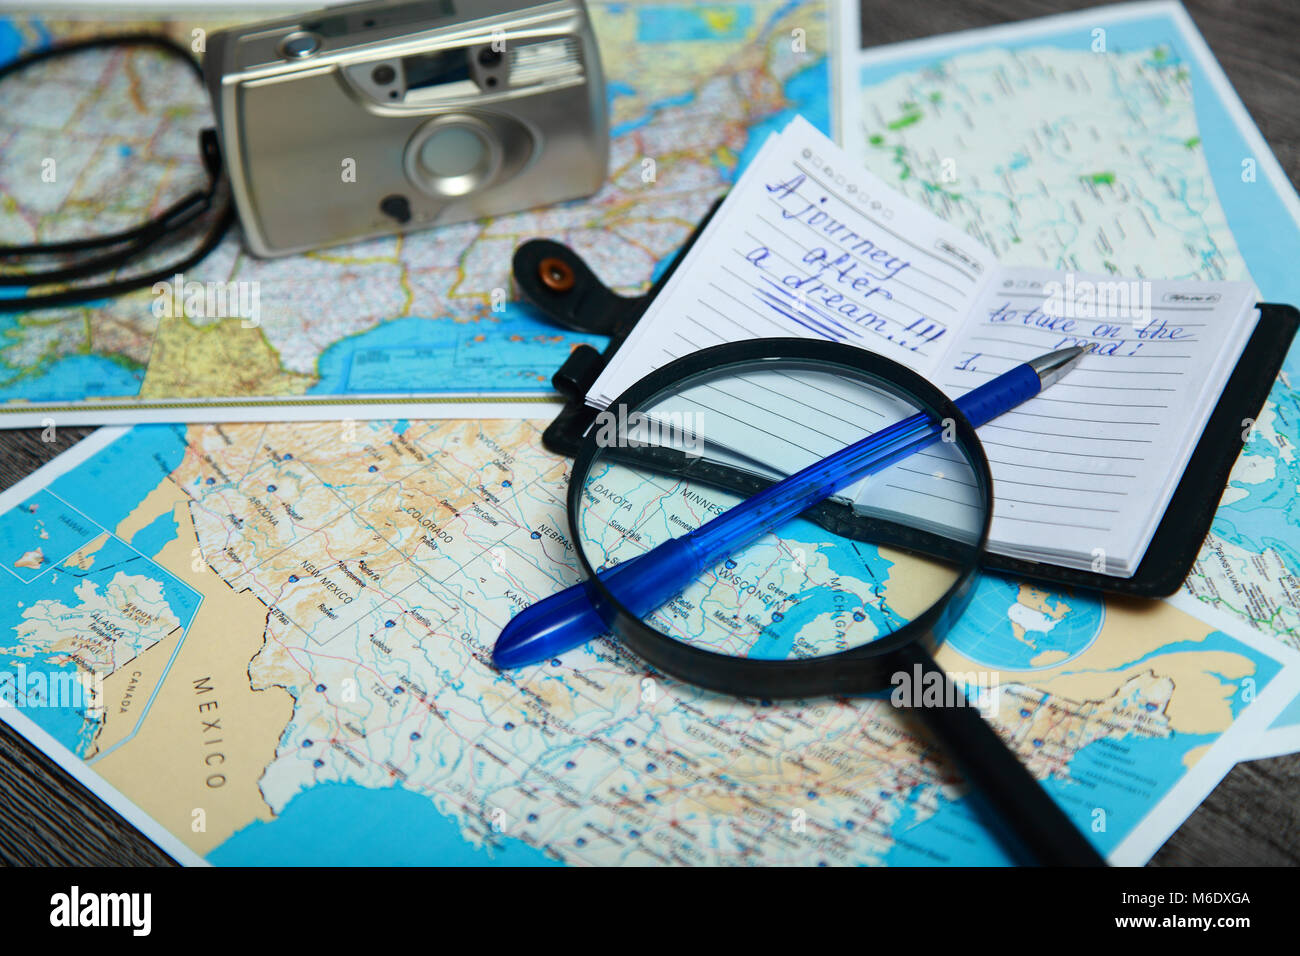 On the table is an Atlas of the United States. Nearby are magnifier, notebook, pen and camera. Travel preparation. Stock Photo